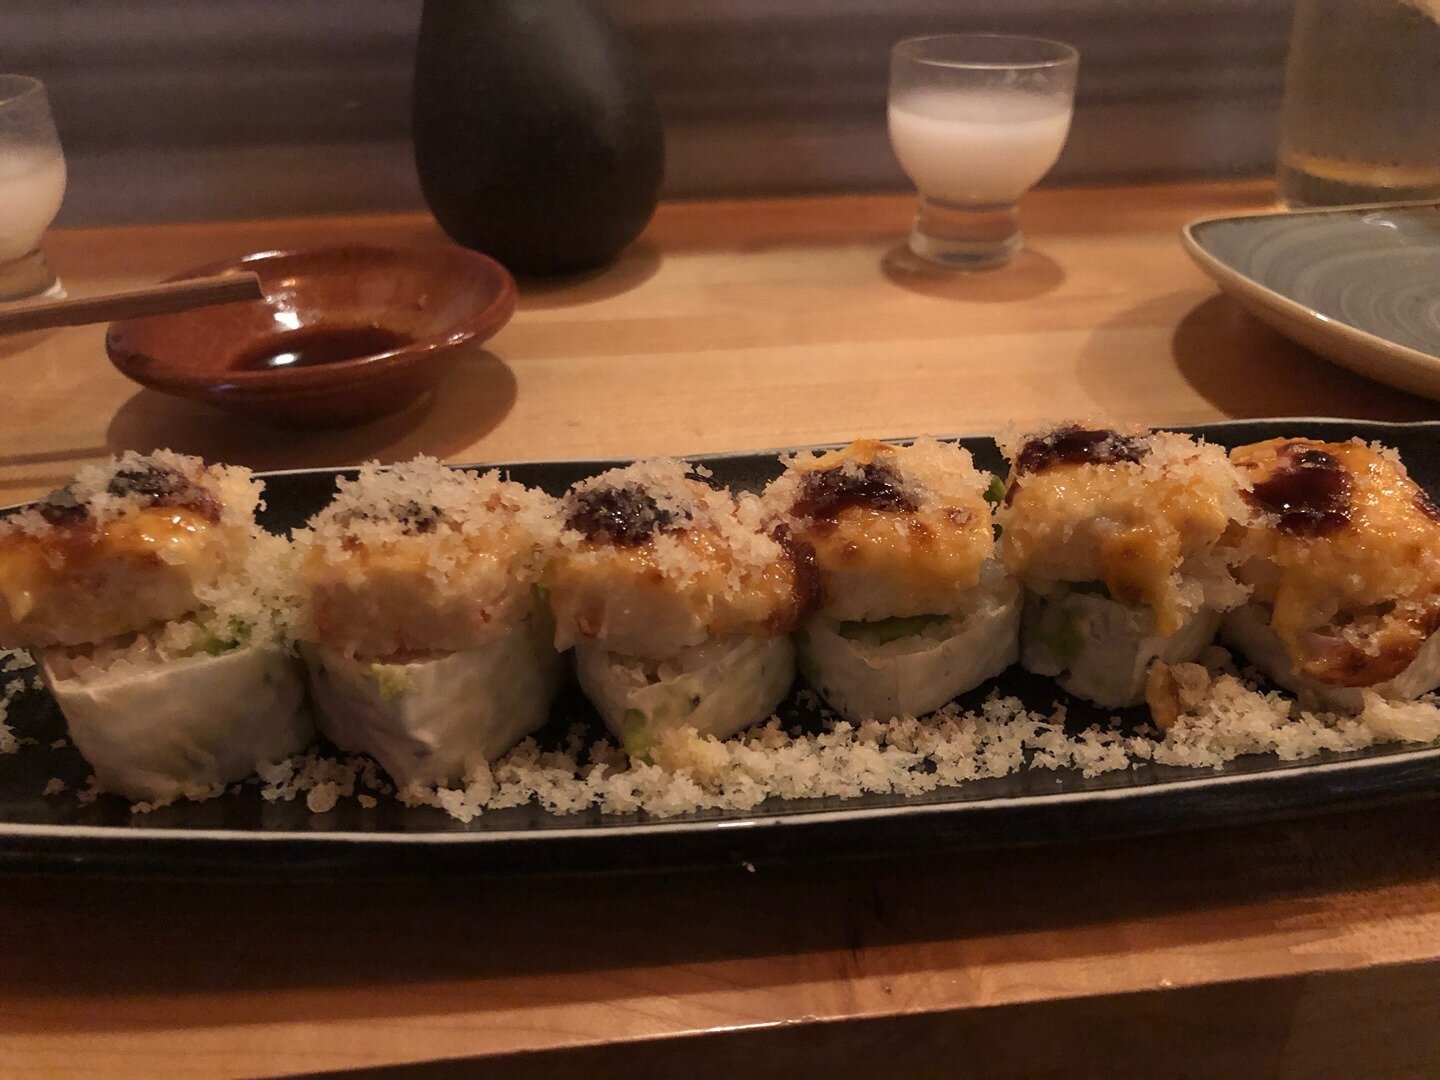 Celebrities love their sushi.  So, in a town as star studded as Los Angeles, sushi culture was bound to experience local crossover with the Hollywood industry. 

Hamasaku did just that when first opening its doors.  Focusing on a vast array of rolls 